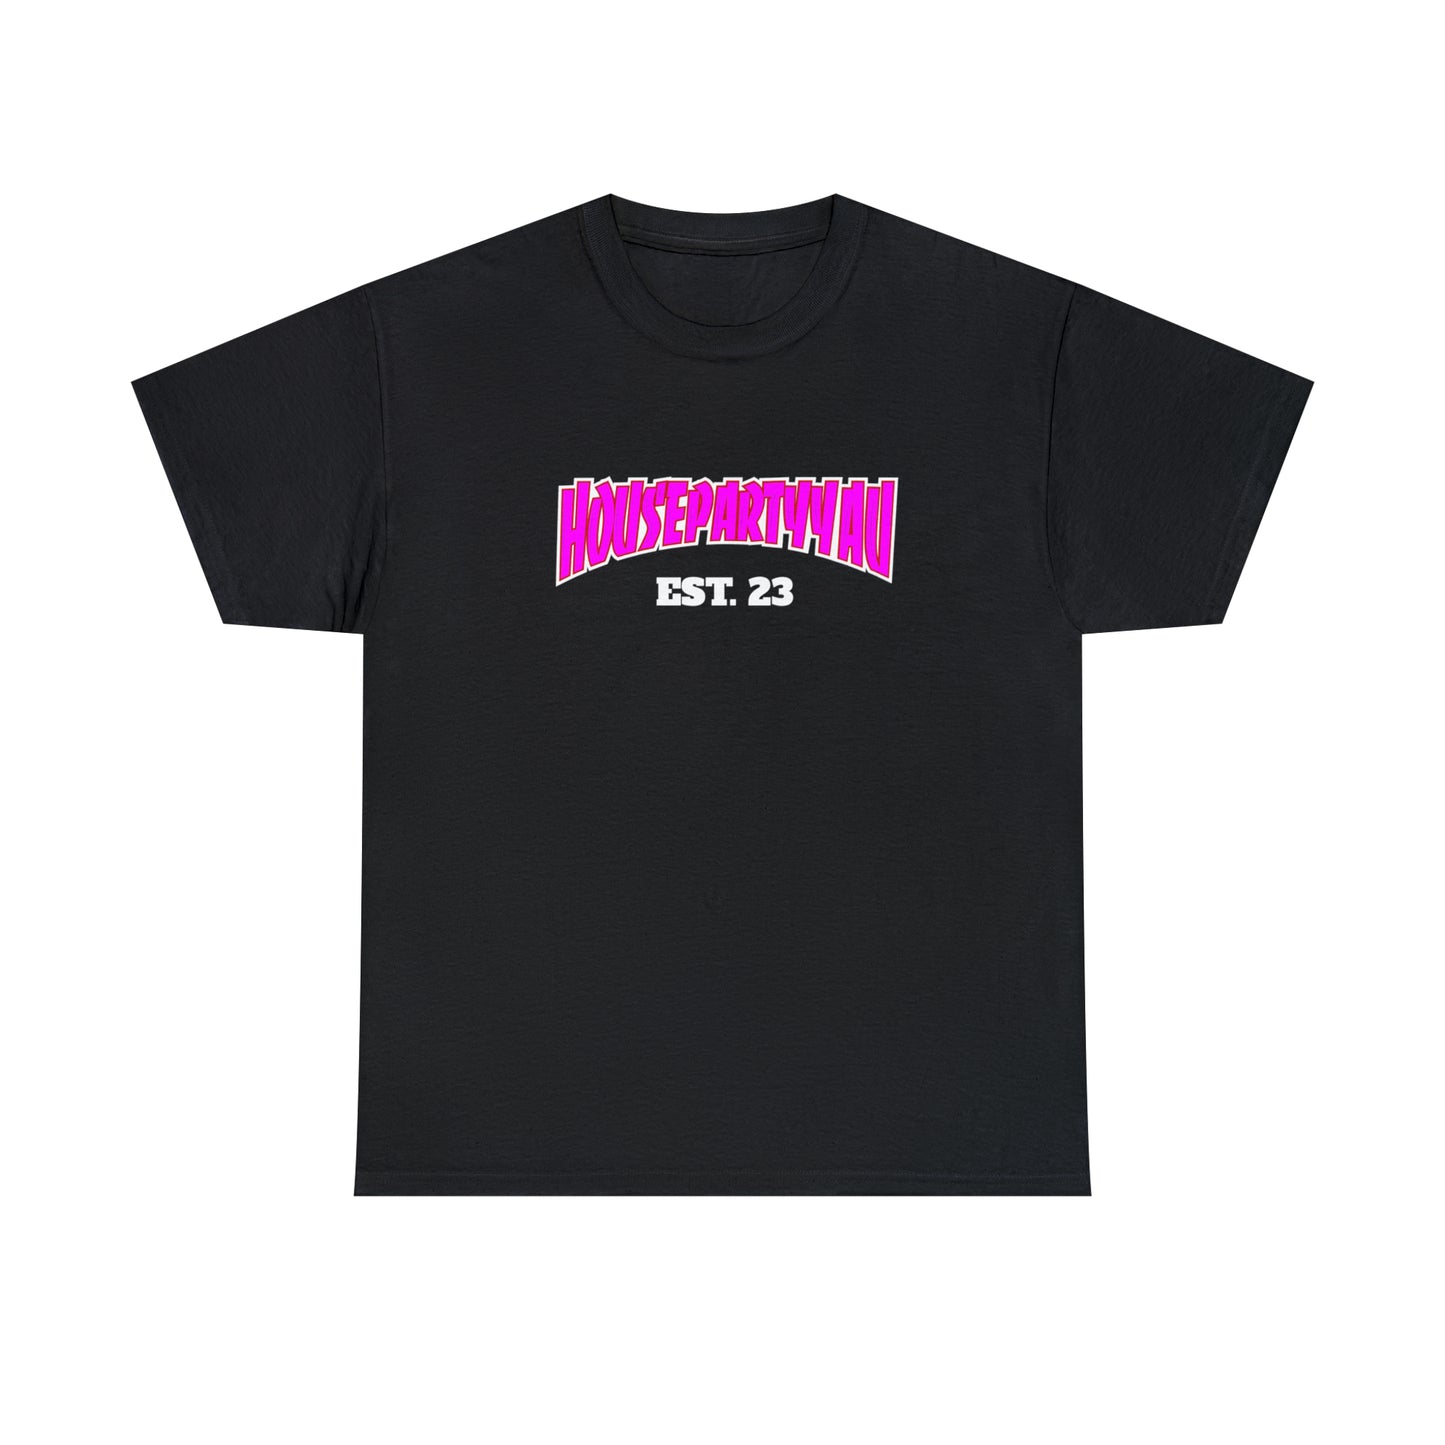 The Partyy Tee ™